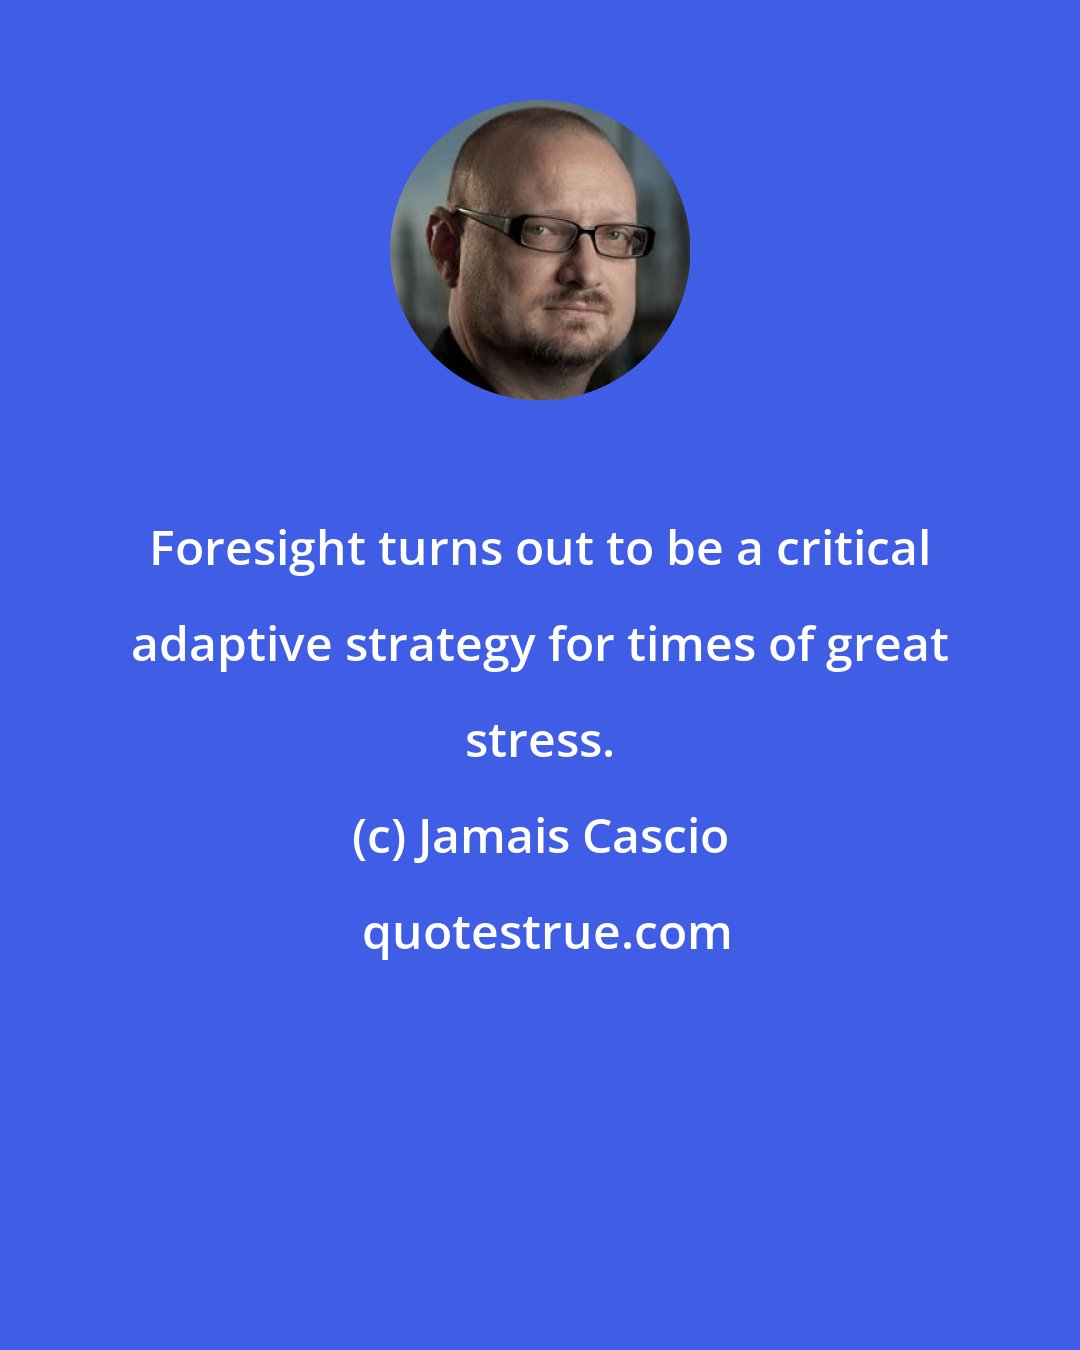 Jamais Cascio: Foresight turns out to be a critical adaptive strategy for times of great stress.